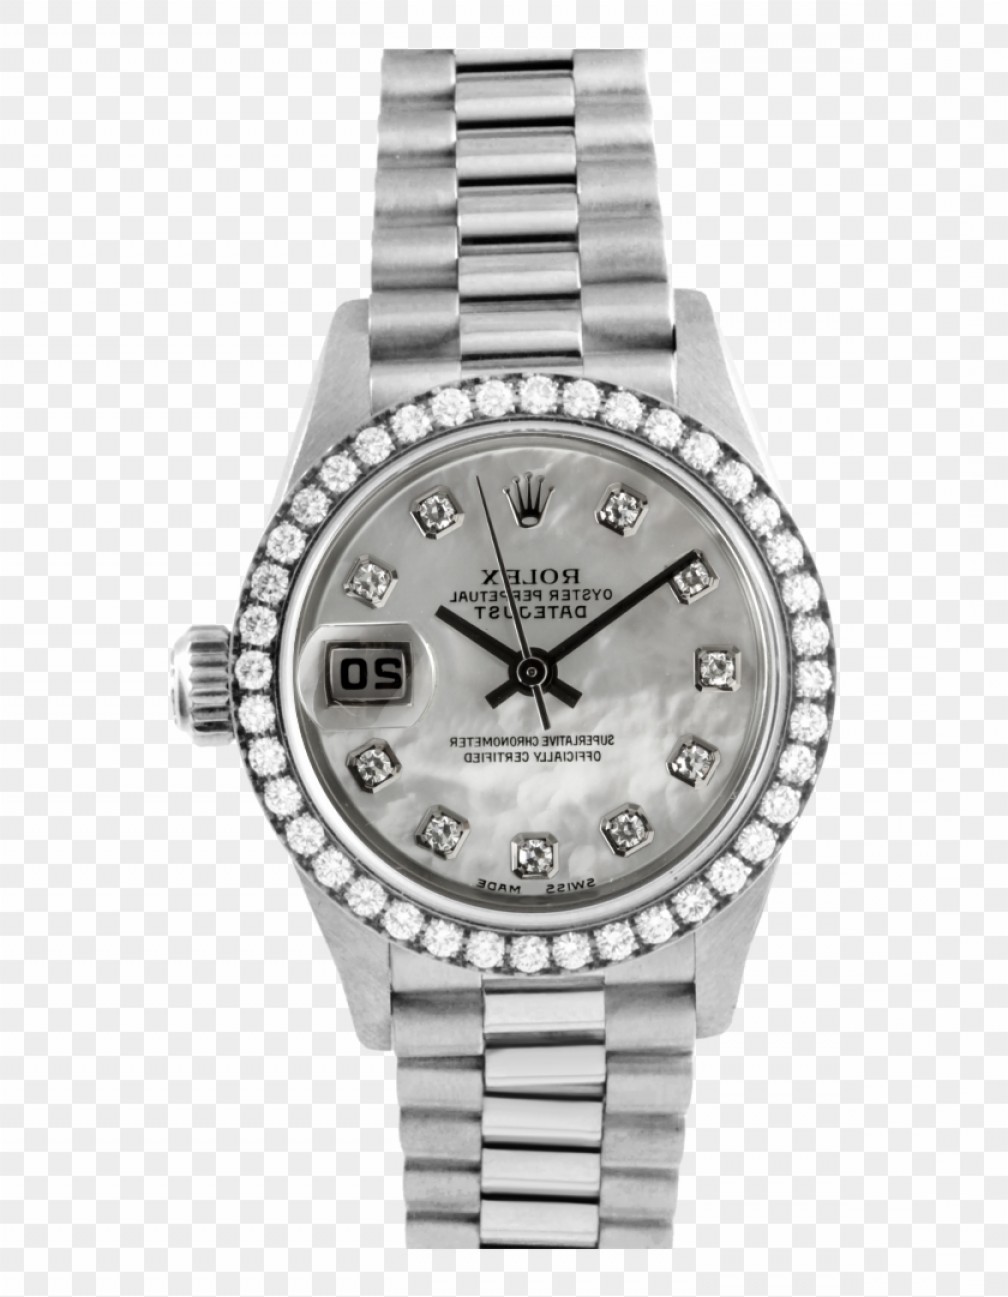 Download Rolex Watch Vector at Vectorified.com | Collection of ...